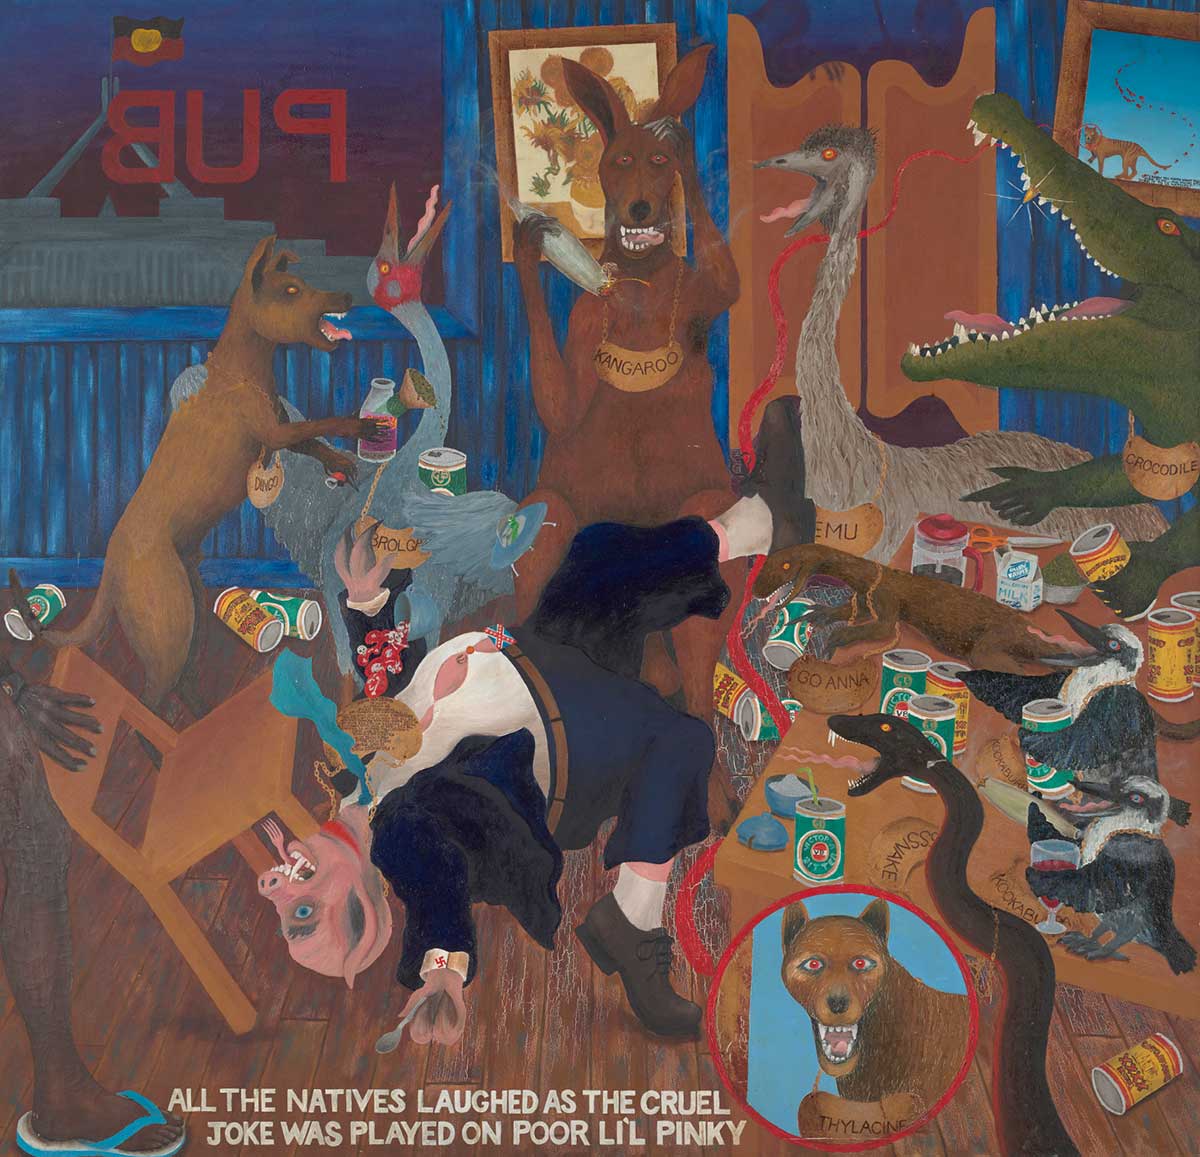 Painting showing a bar scene caricature of anthropomorphised Australian native animals playing a joke on a pig, with beer cans strewn all around.